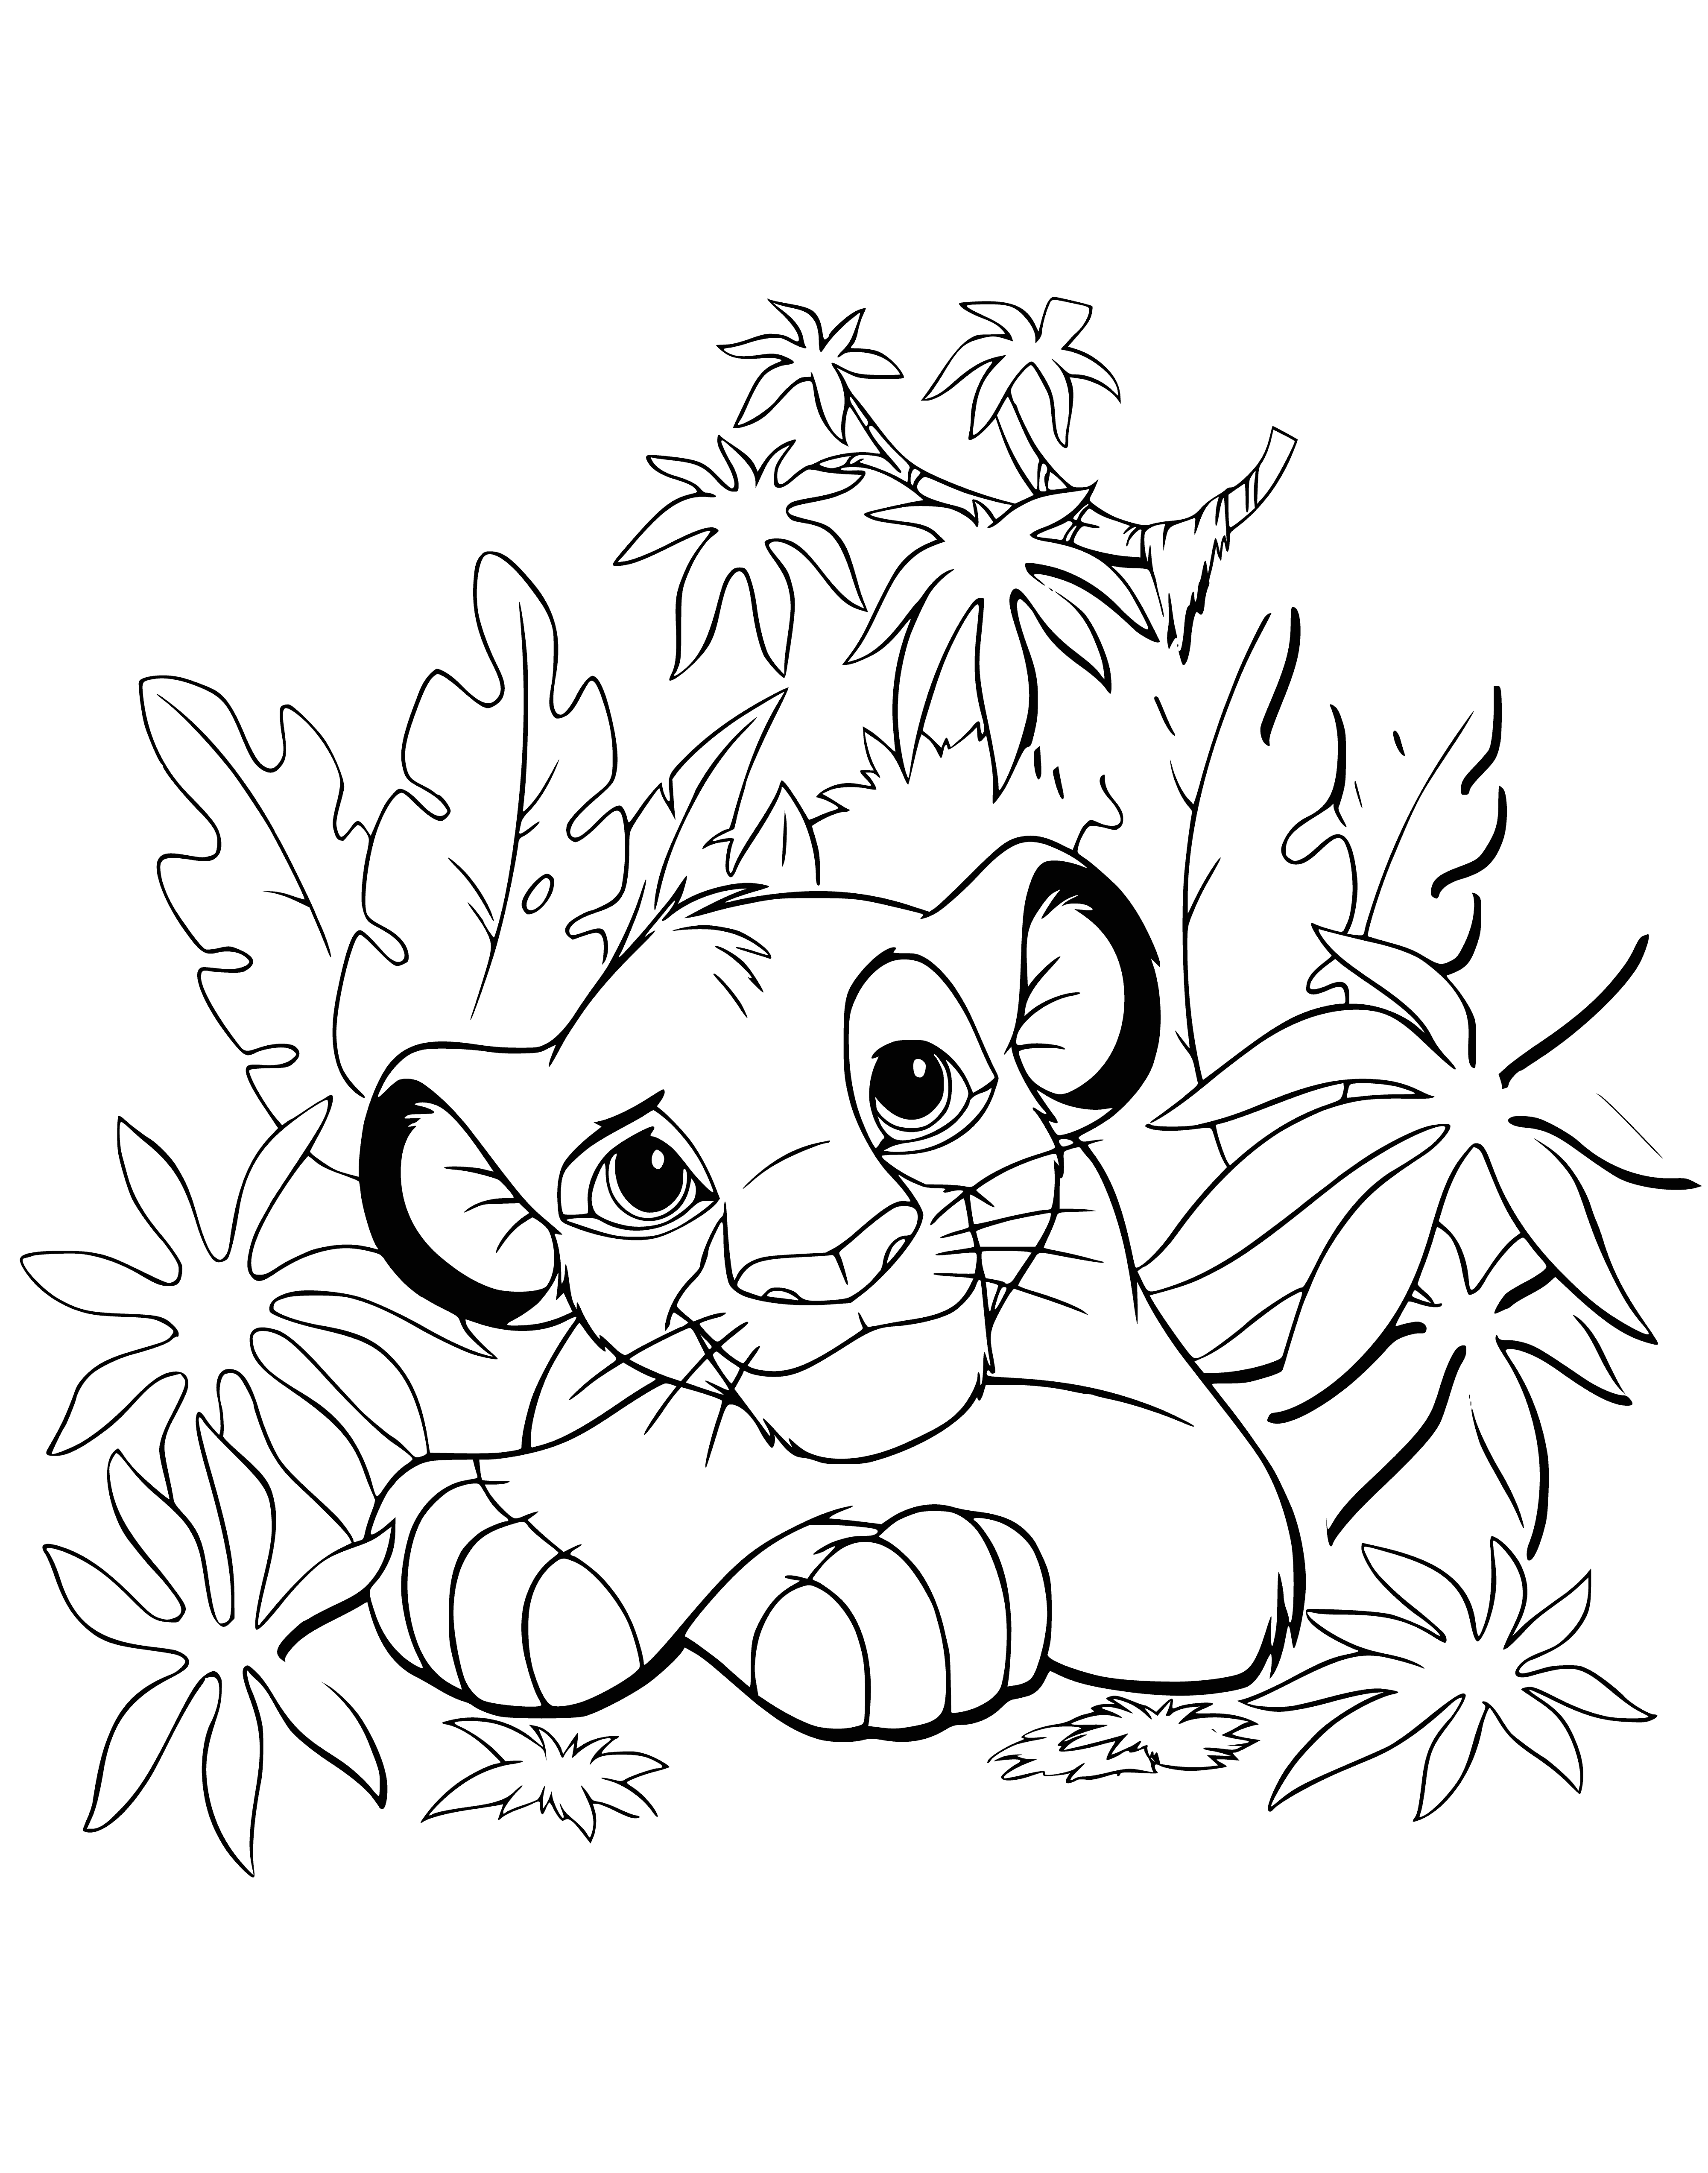 coloring page: Lion cub on savanna looks happy, w/light yellow fur and brown mane, smiling with tail up in air. Enjoying a grand time.